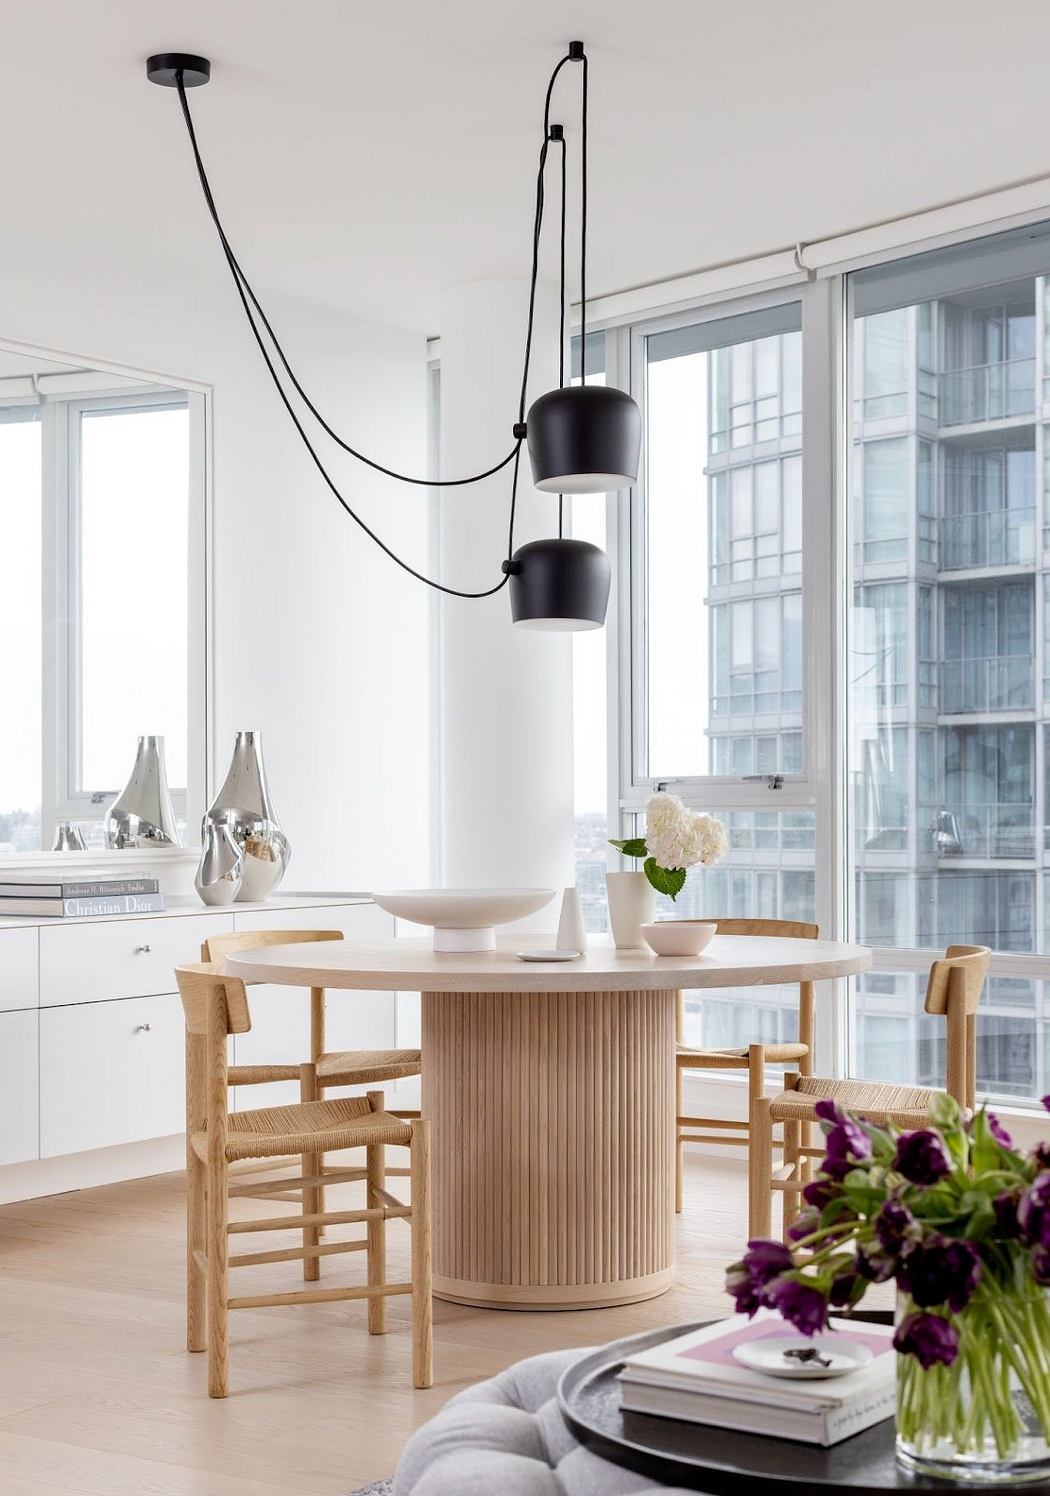 Minimalist dining space with sculptural light fixture and city view.